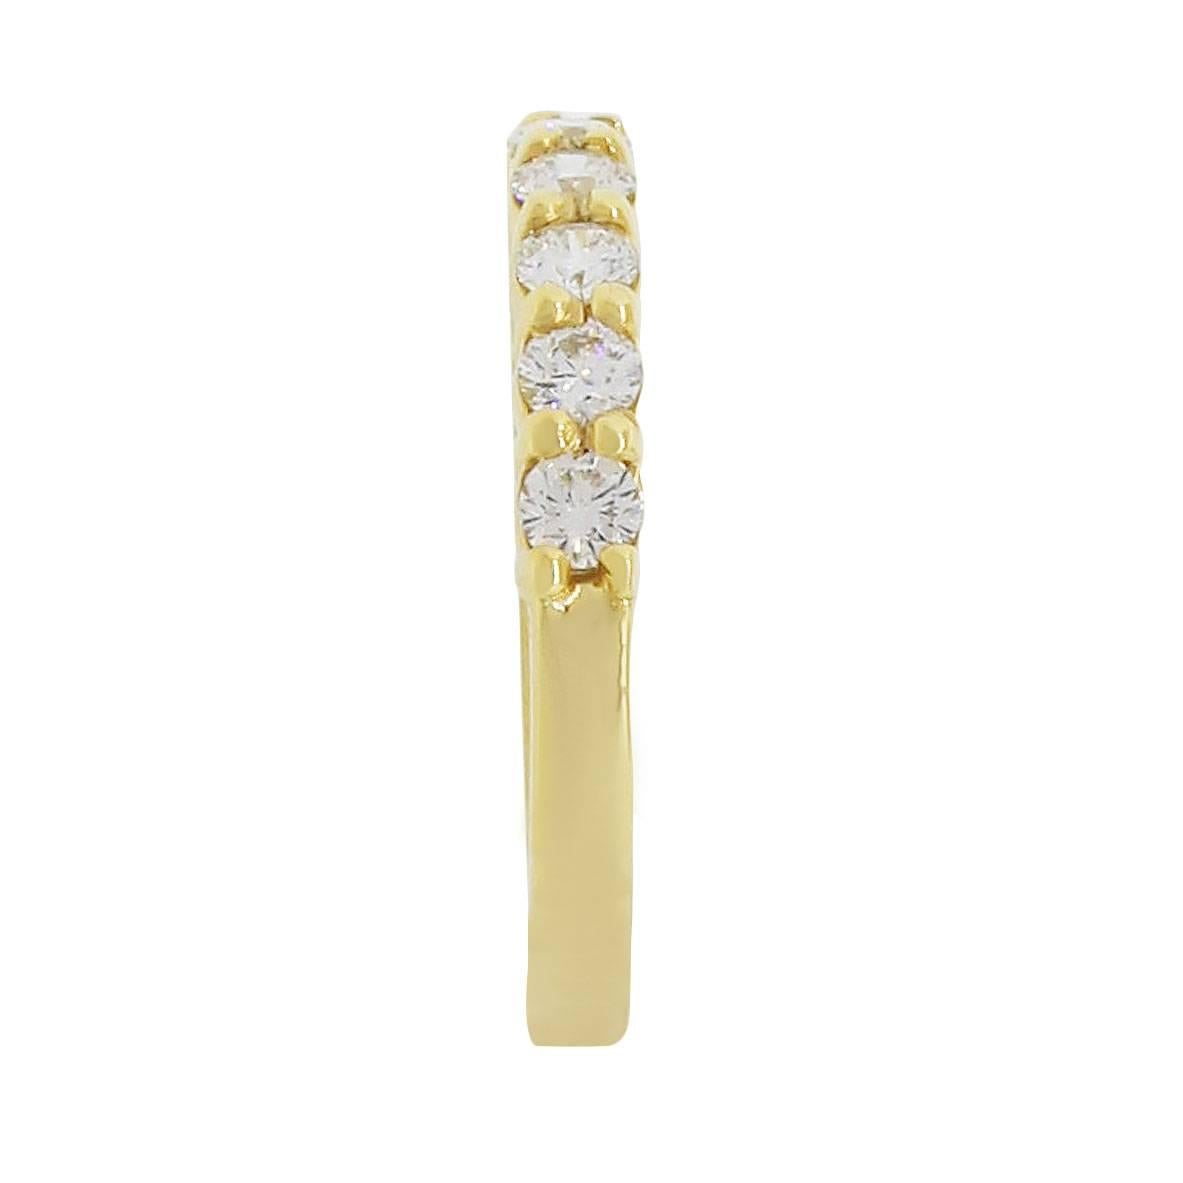 Material: 14k yellow gold
Diamond Details: Approximately 2.76ctw of round brilliant diamonds. Diamonds are H/J in color and SI in clarity.
Ring Size: 6.25
Ring Measurements: 0.86″ x 0.15″ x 0.86″
Total Weight: 4.5g (2.9dwt)
SKU: A30311476